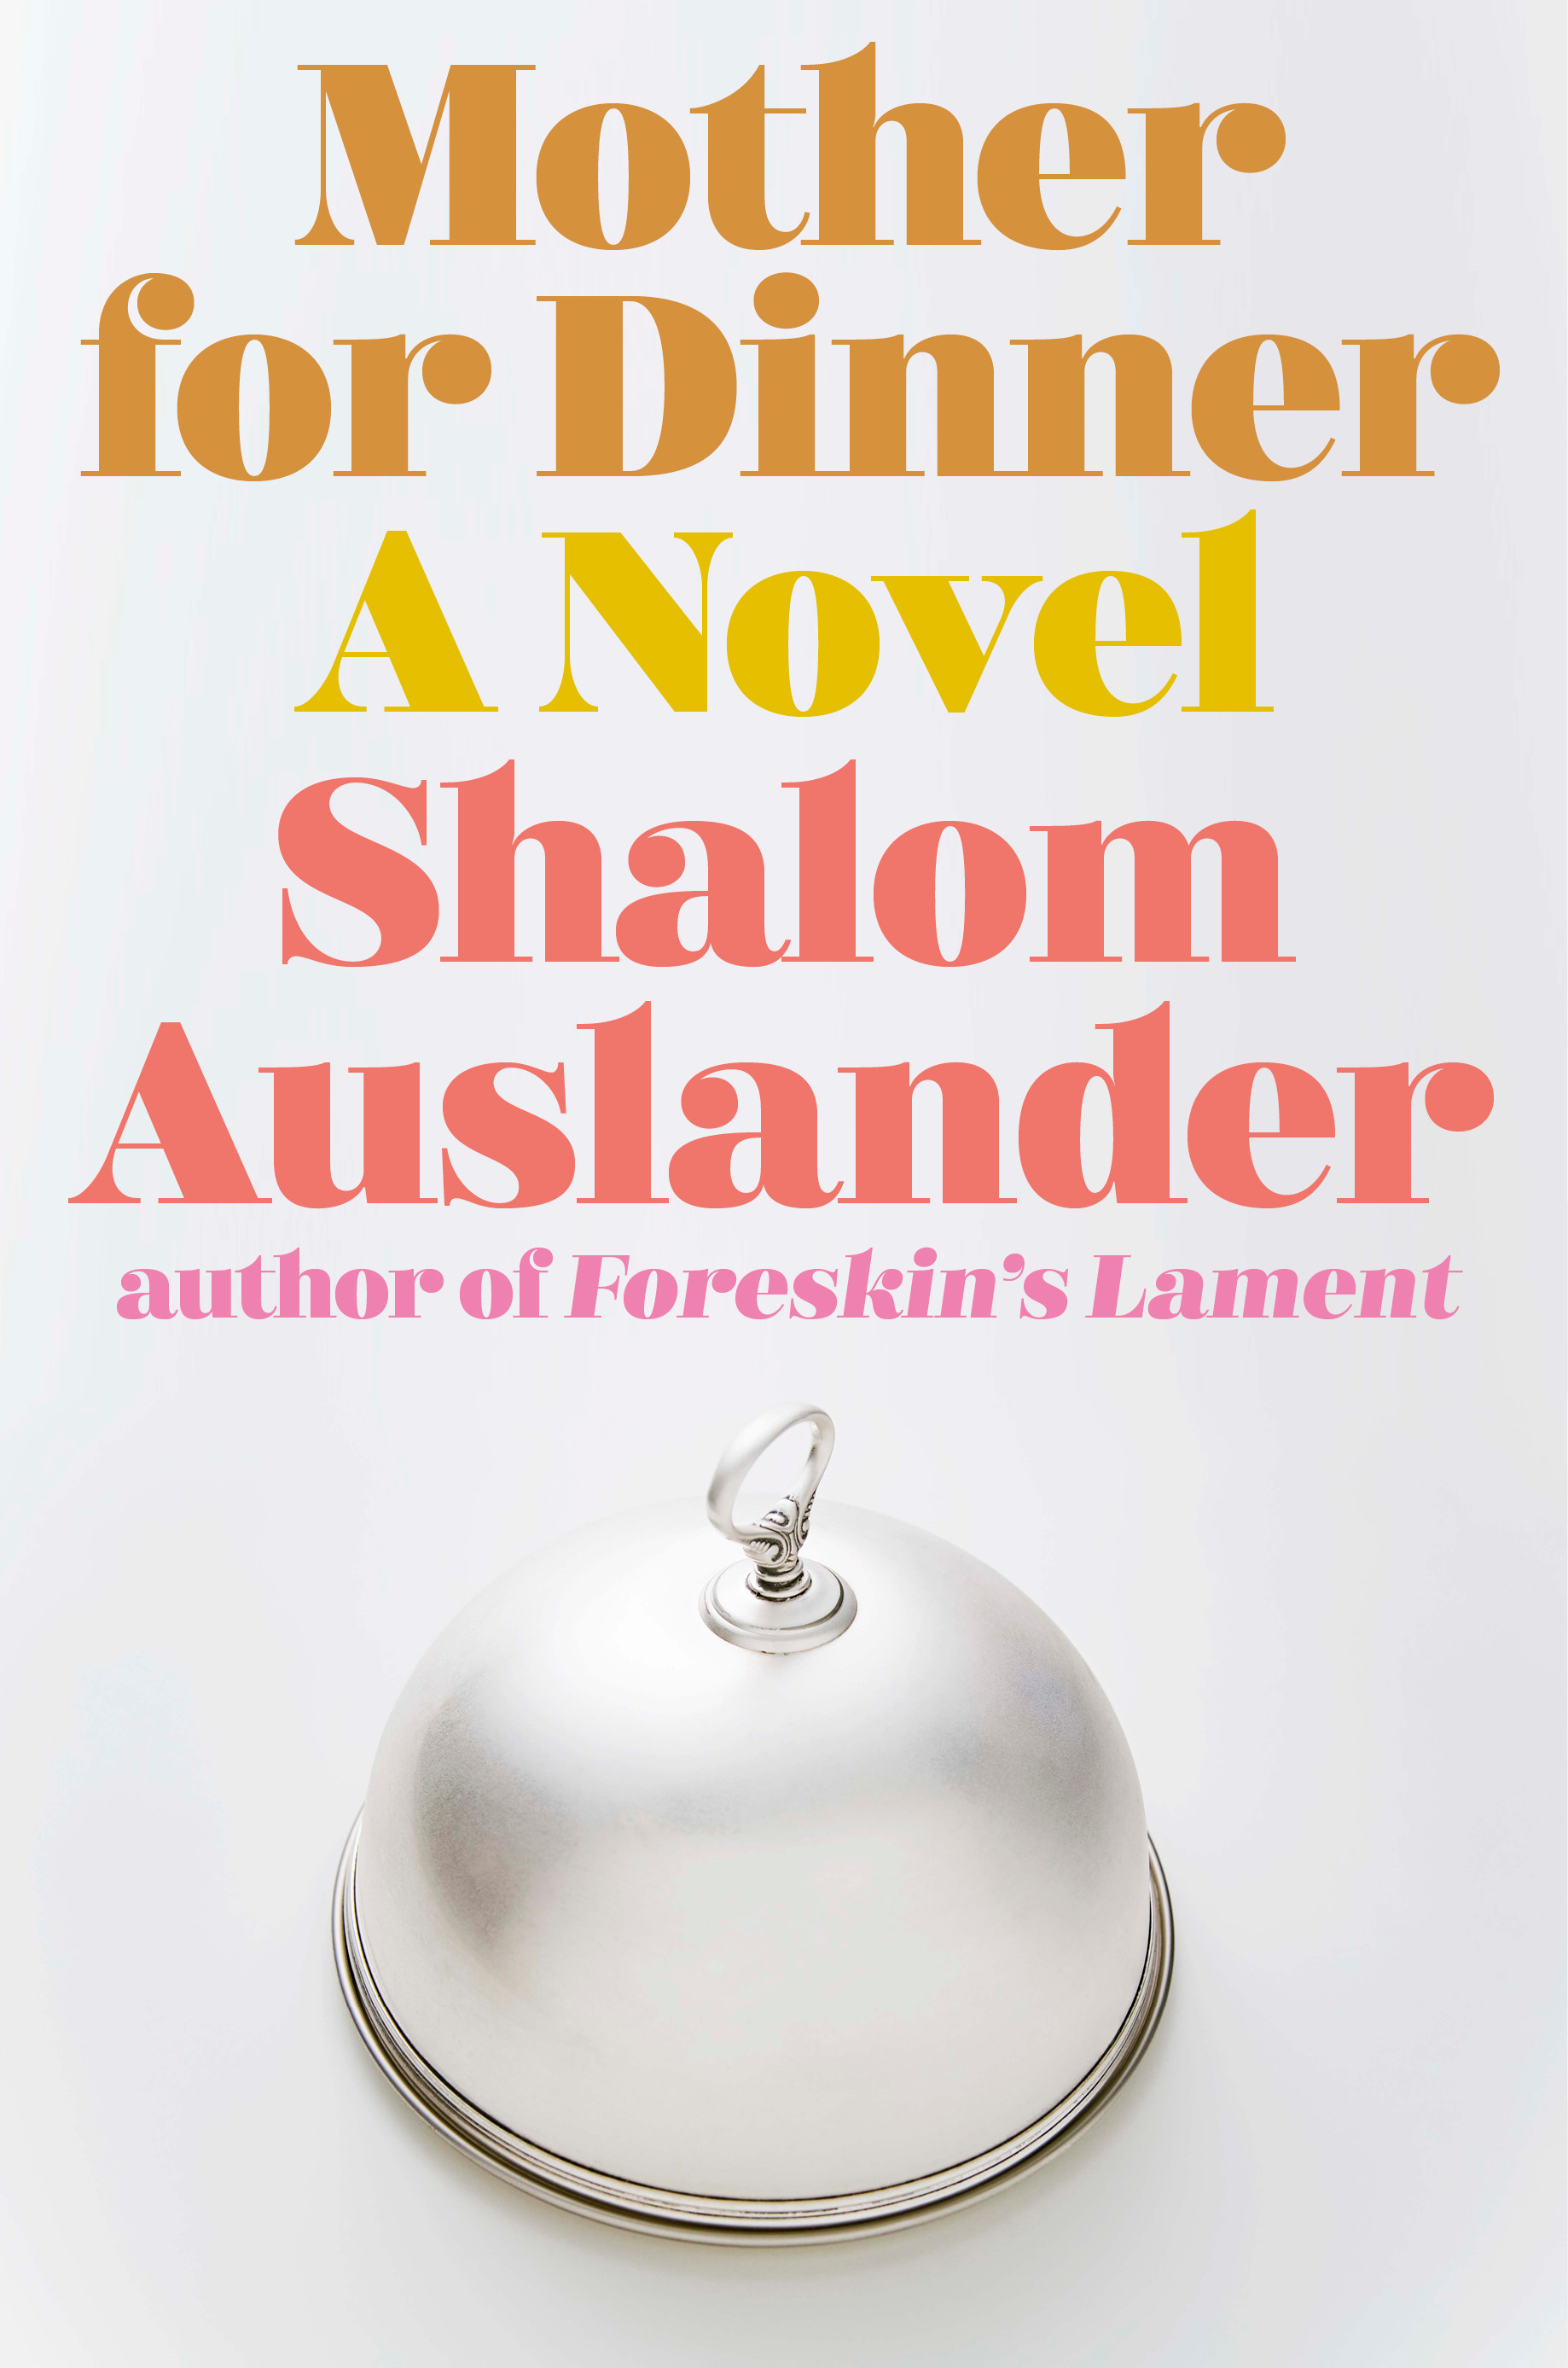 Virtual Book Launch: Mother for Dinner by Shalom Auslander in conversation with Andre Royo